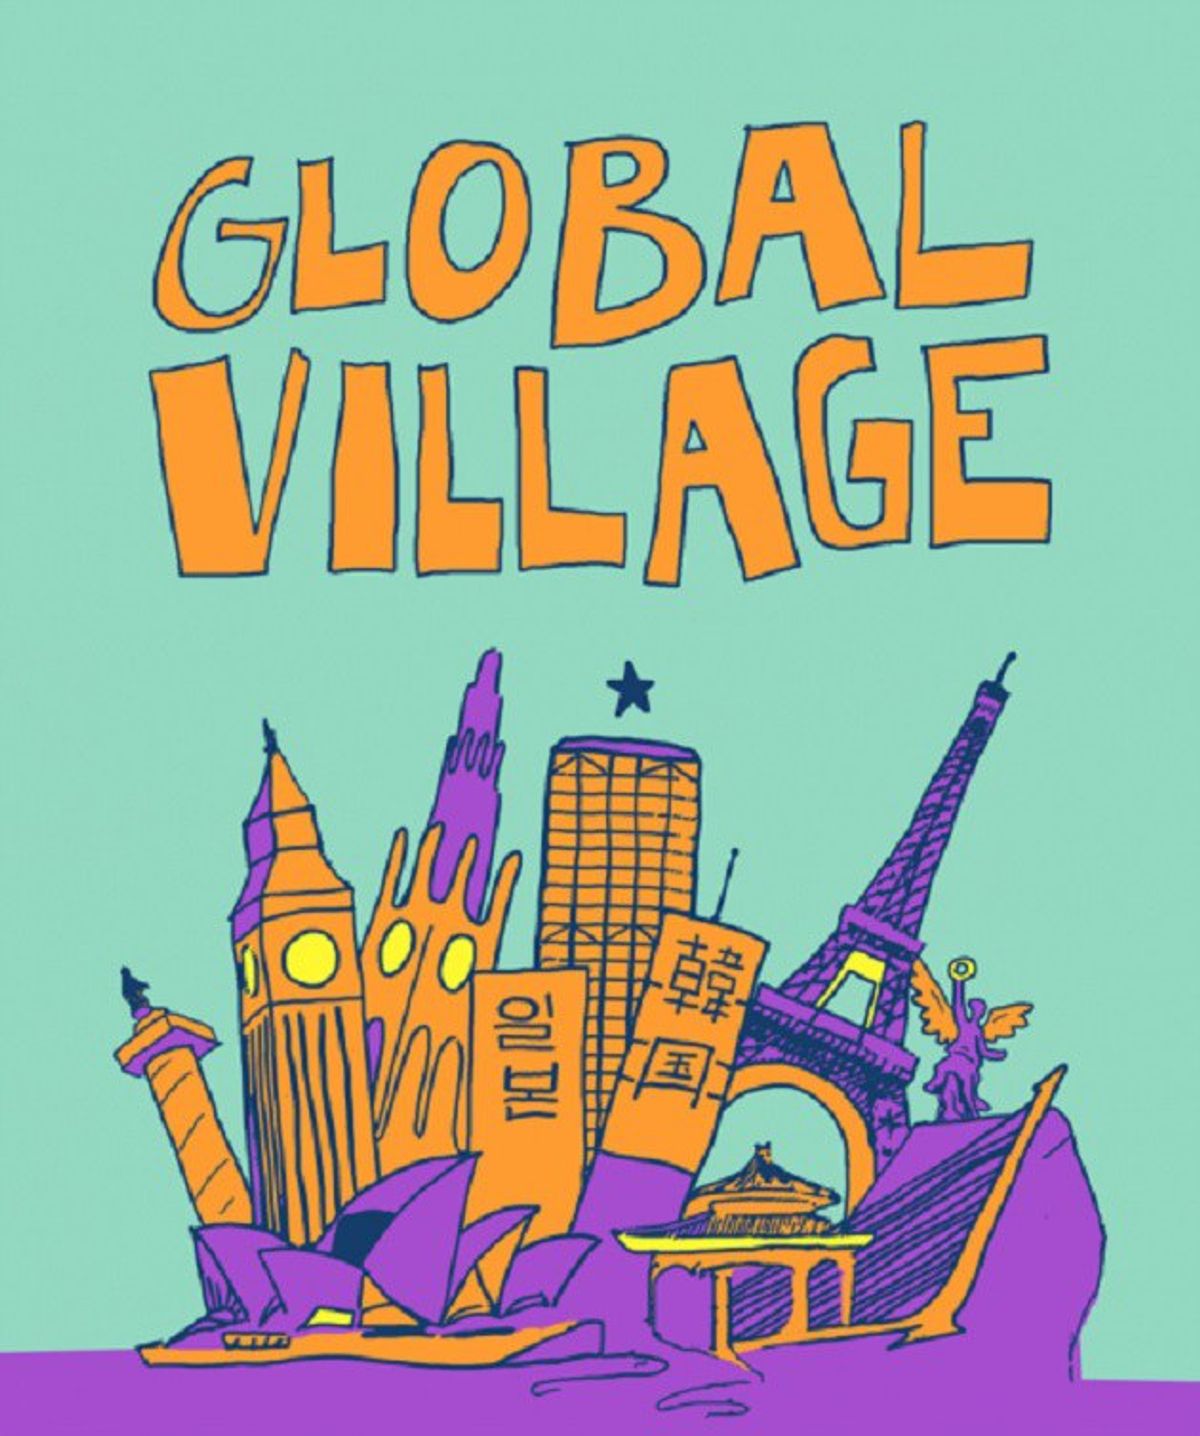 10 Reasons To Live In Global Village